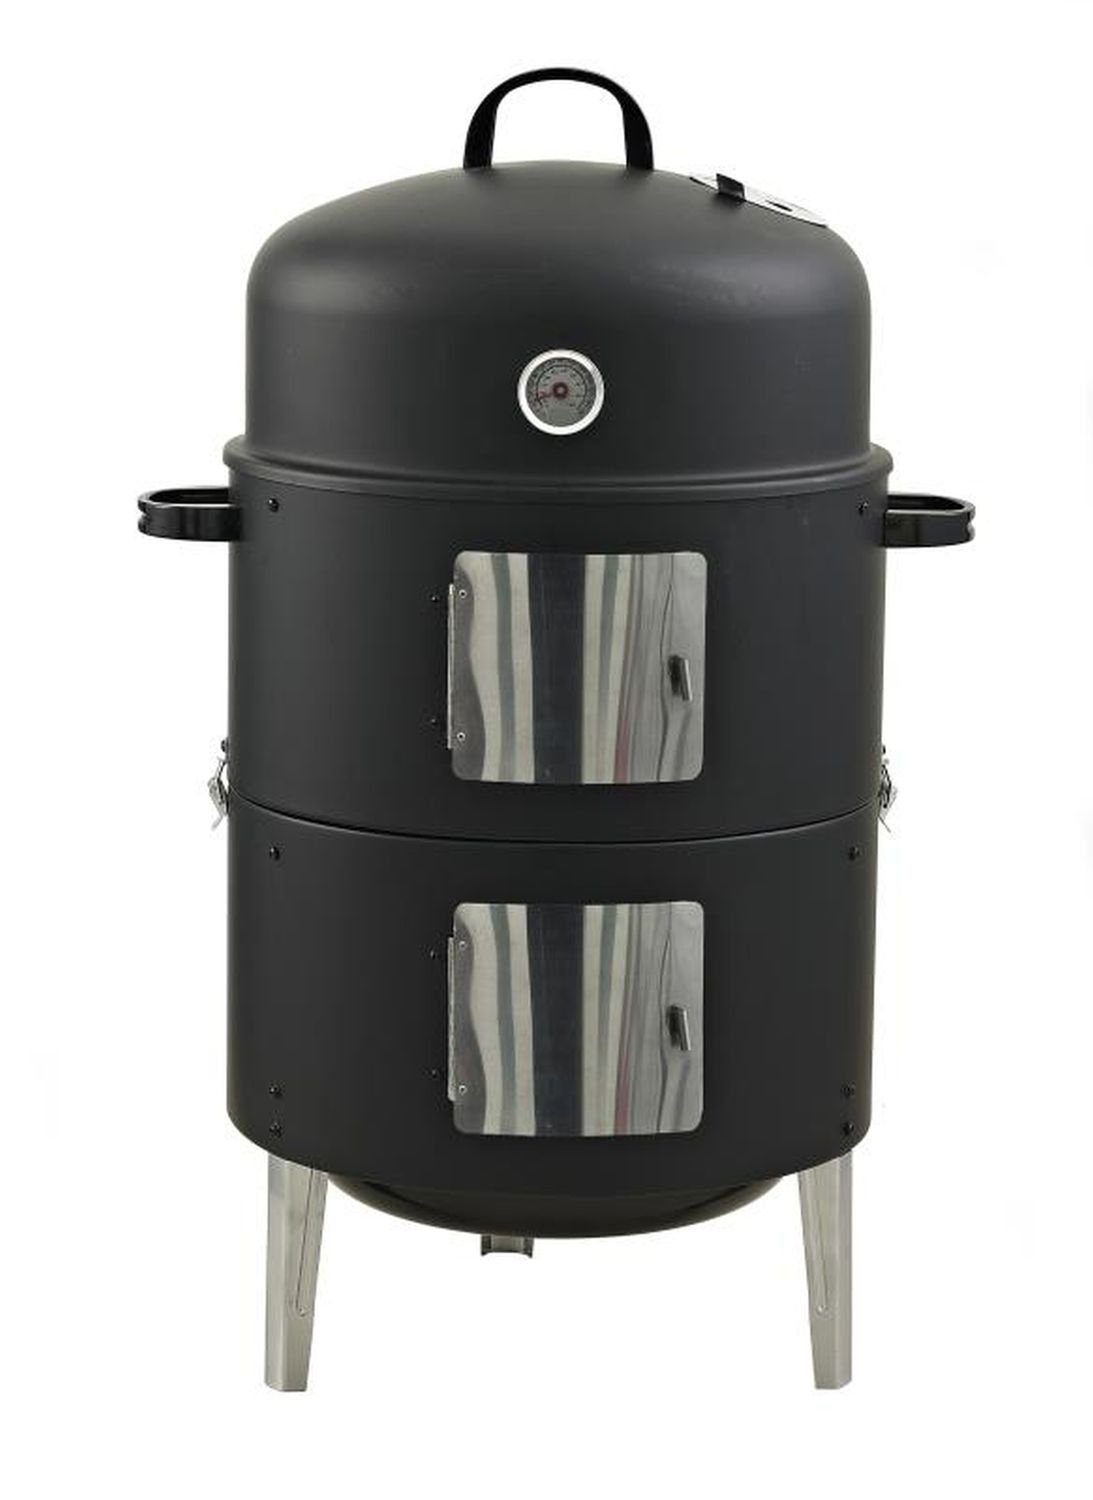 GLÜHZONE Holzkohlegrill RS 400, Smoker 3 in 1, BBQ, Grill, Feuerstelle